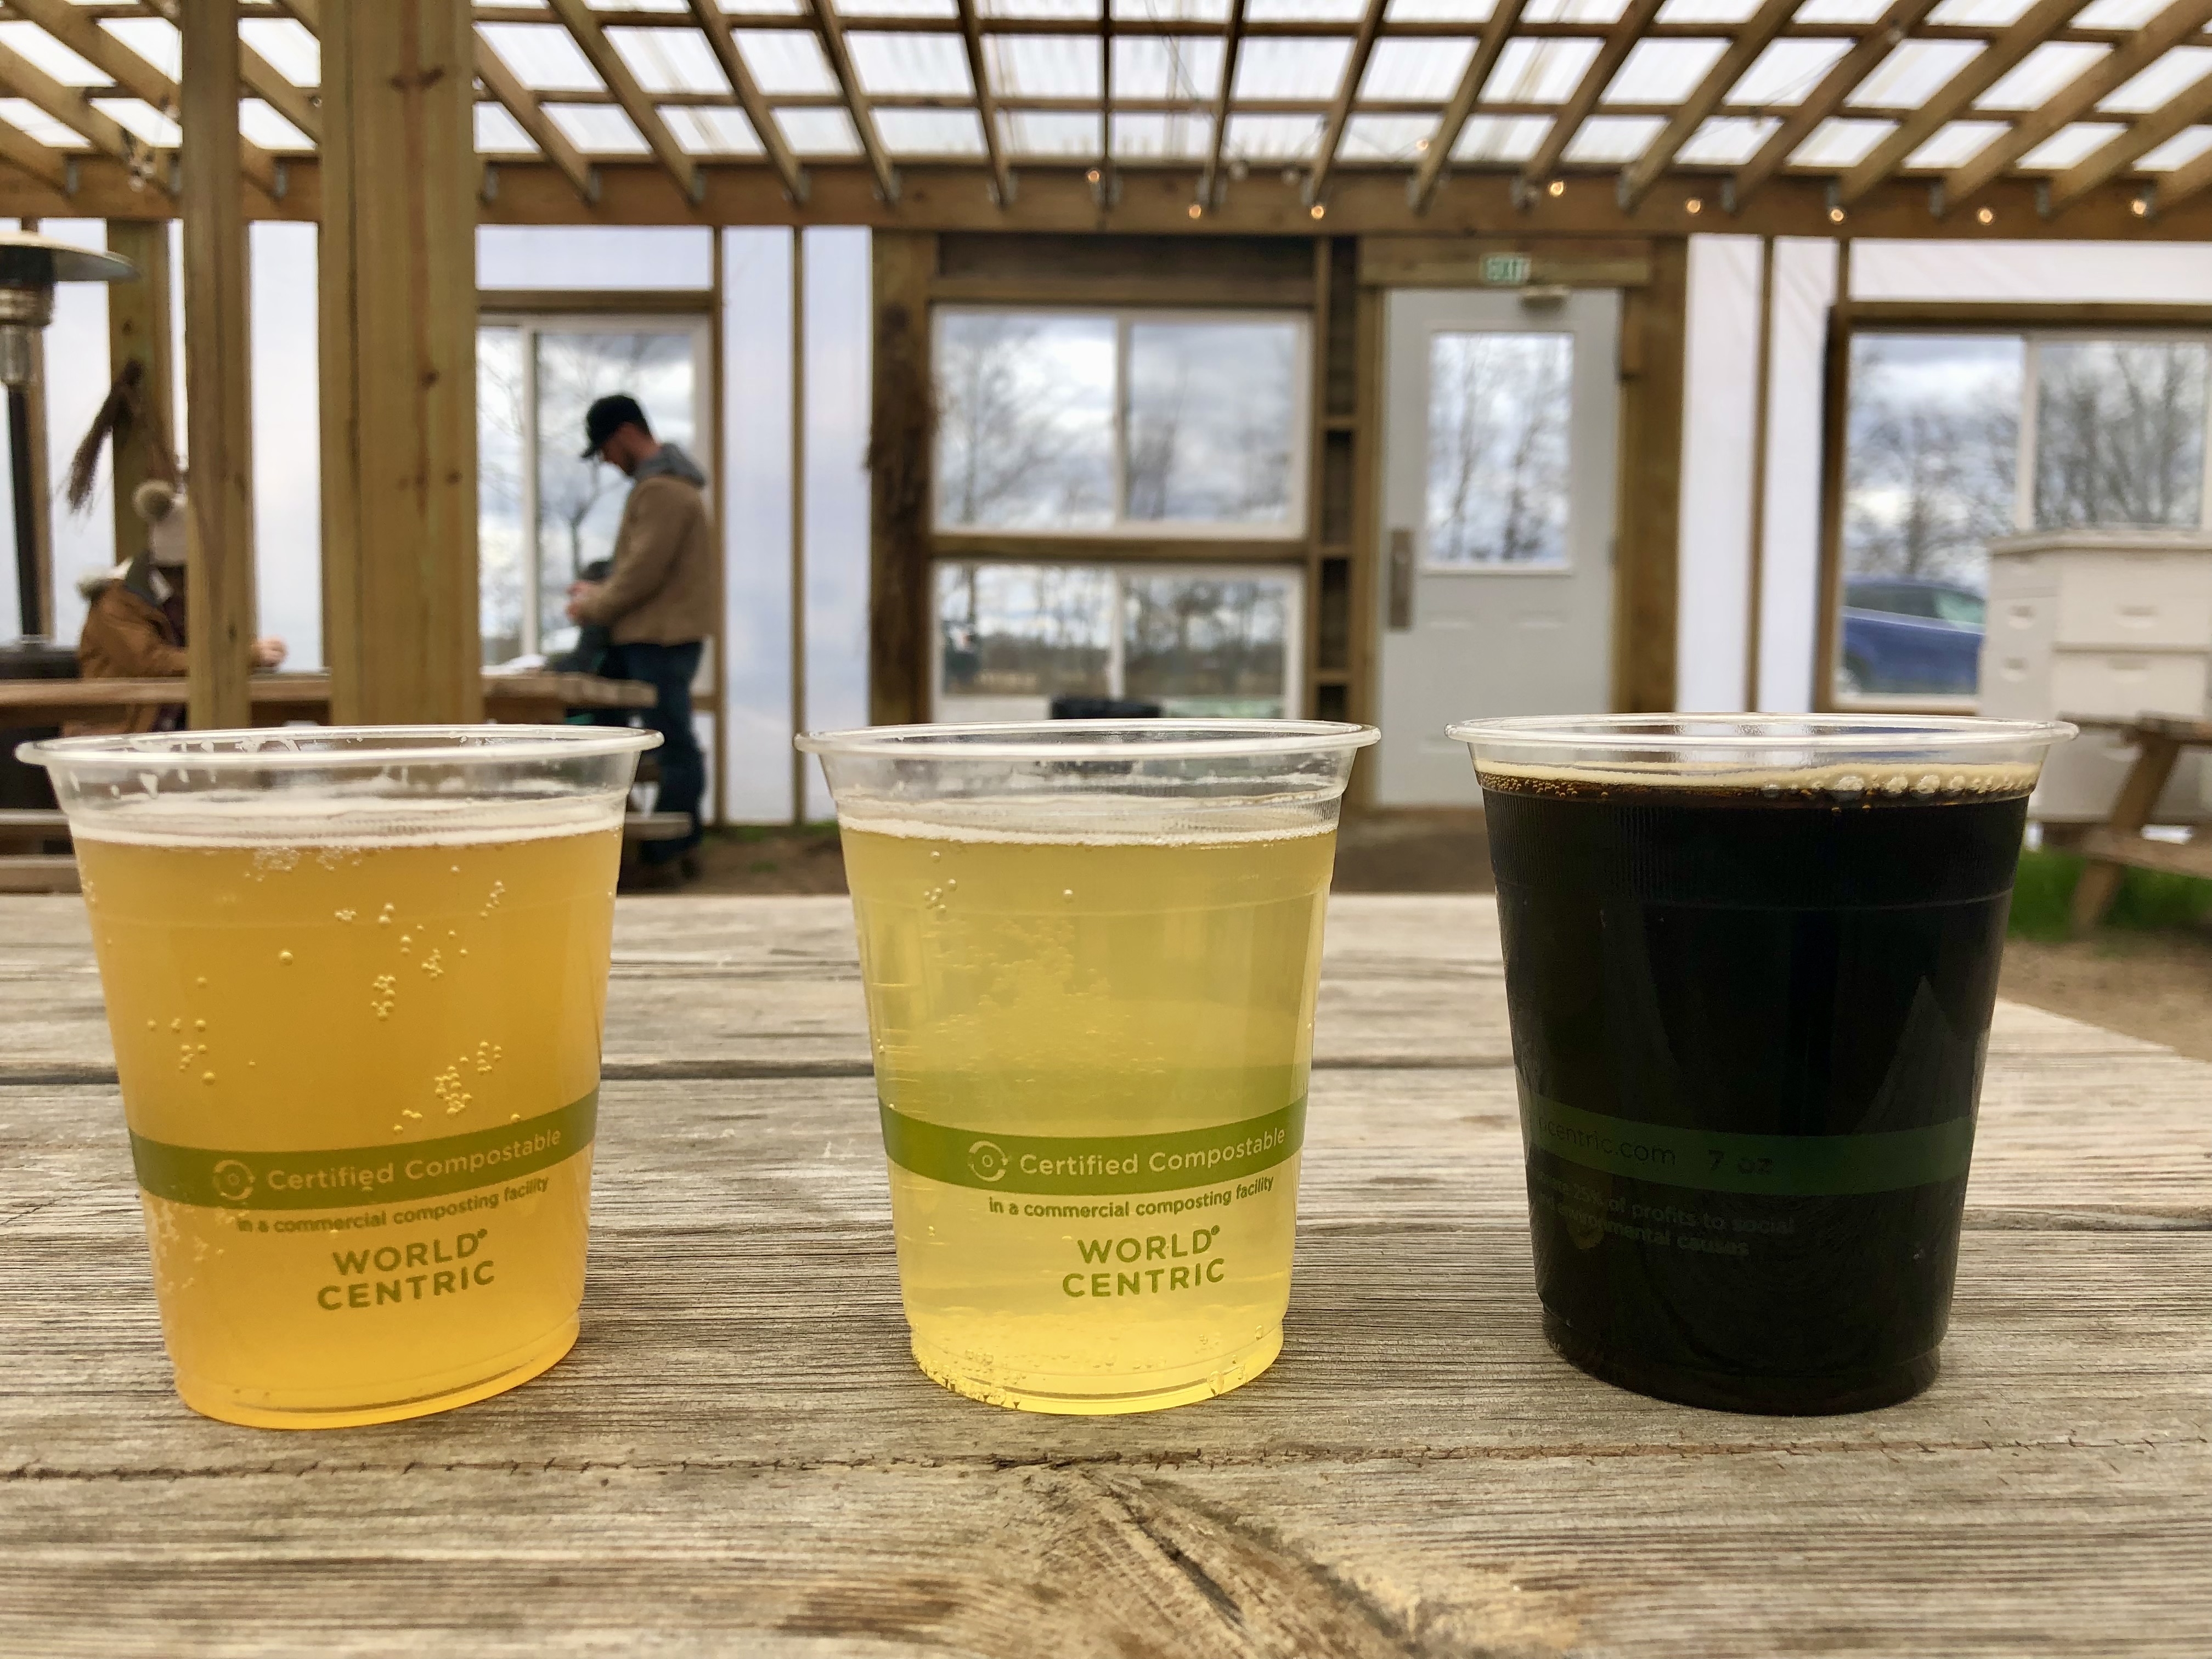 Froth Fest 2022 is happening at Big Thorn Farm this weekend